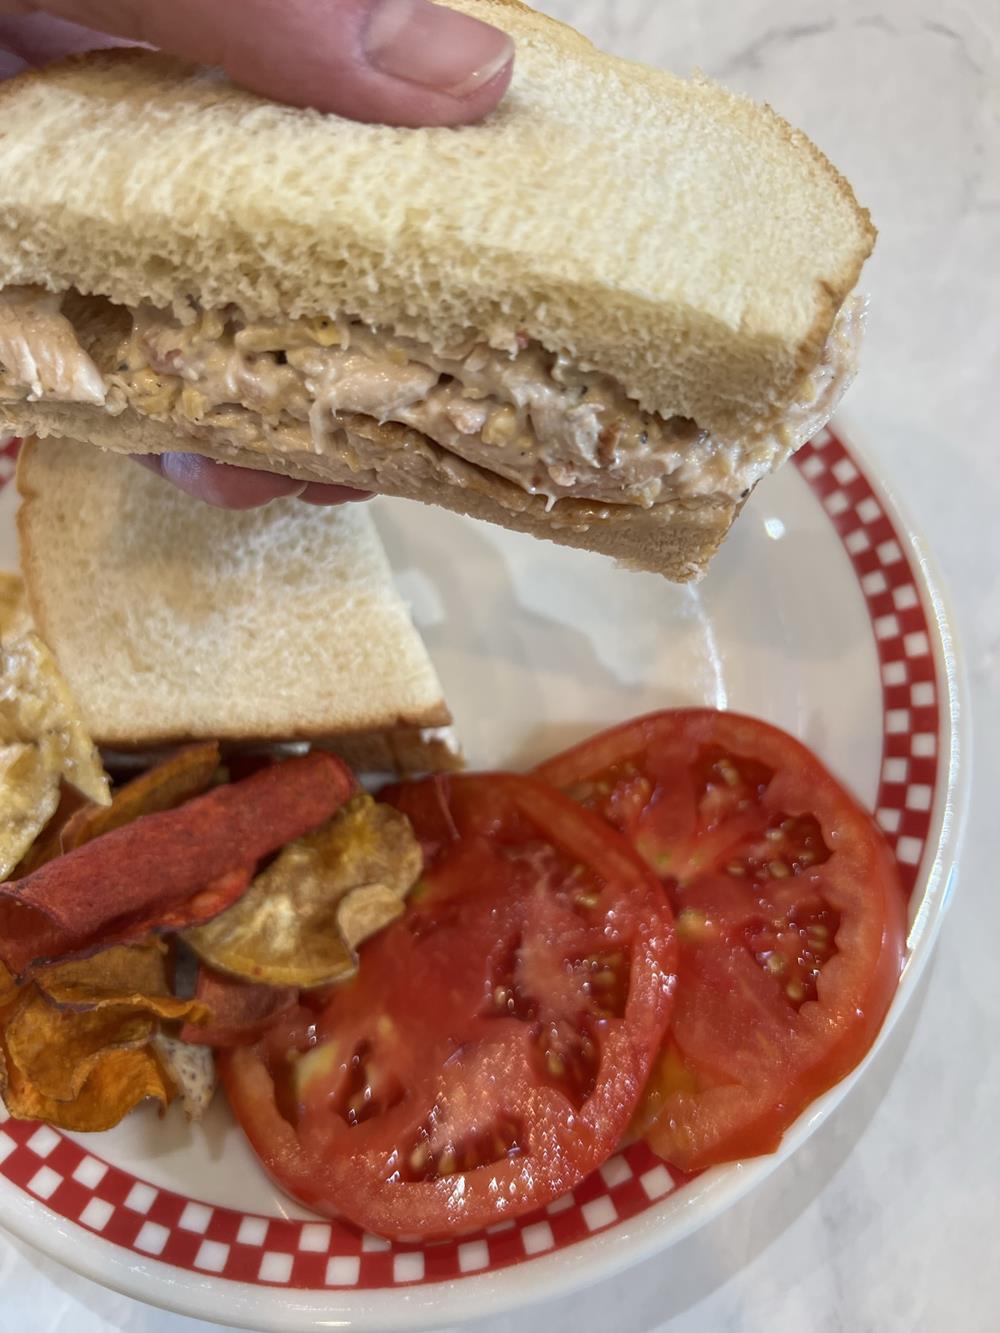 Chicken Salad sandwich with tomatoes and chips on a plate in the background